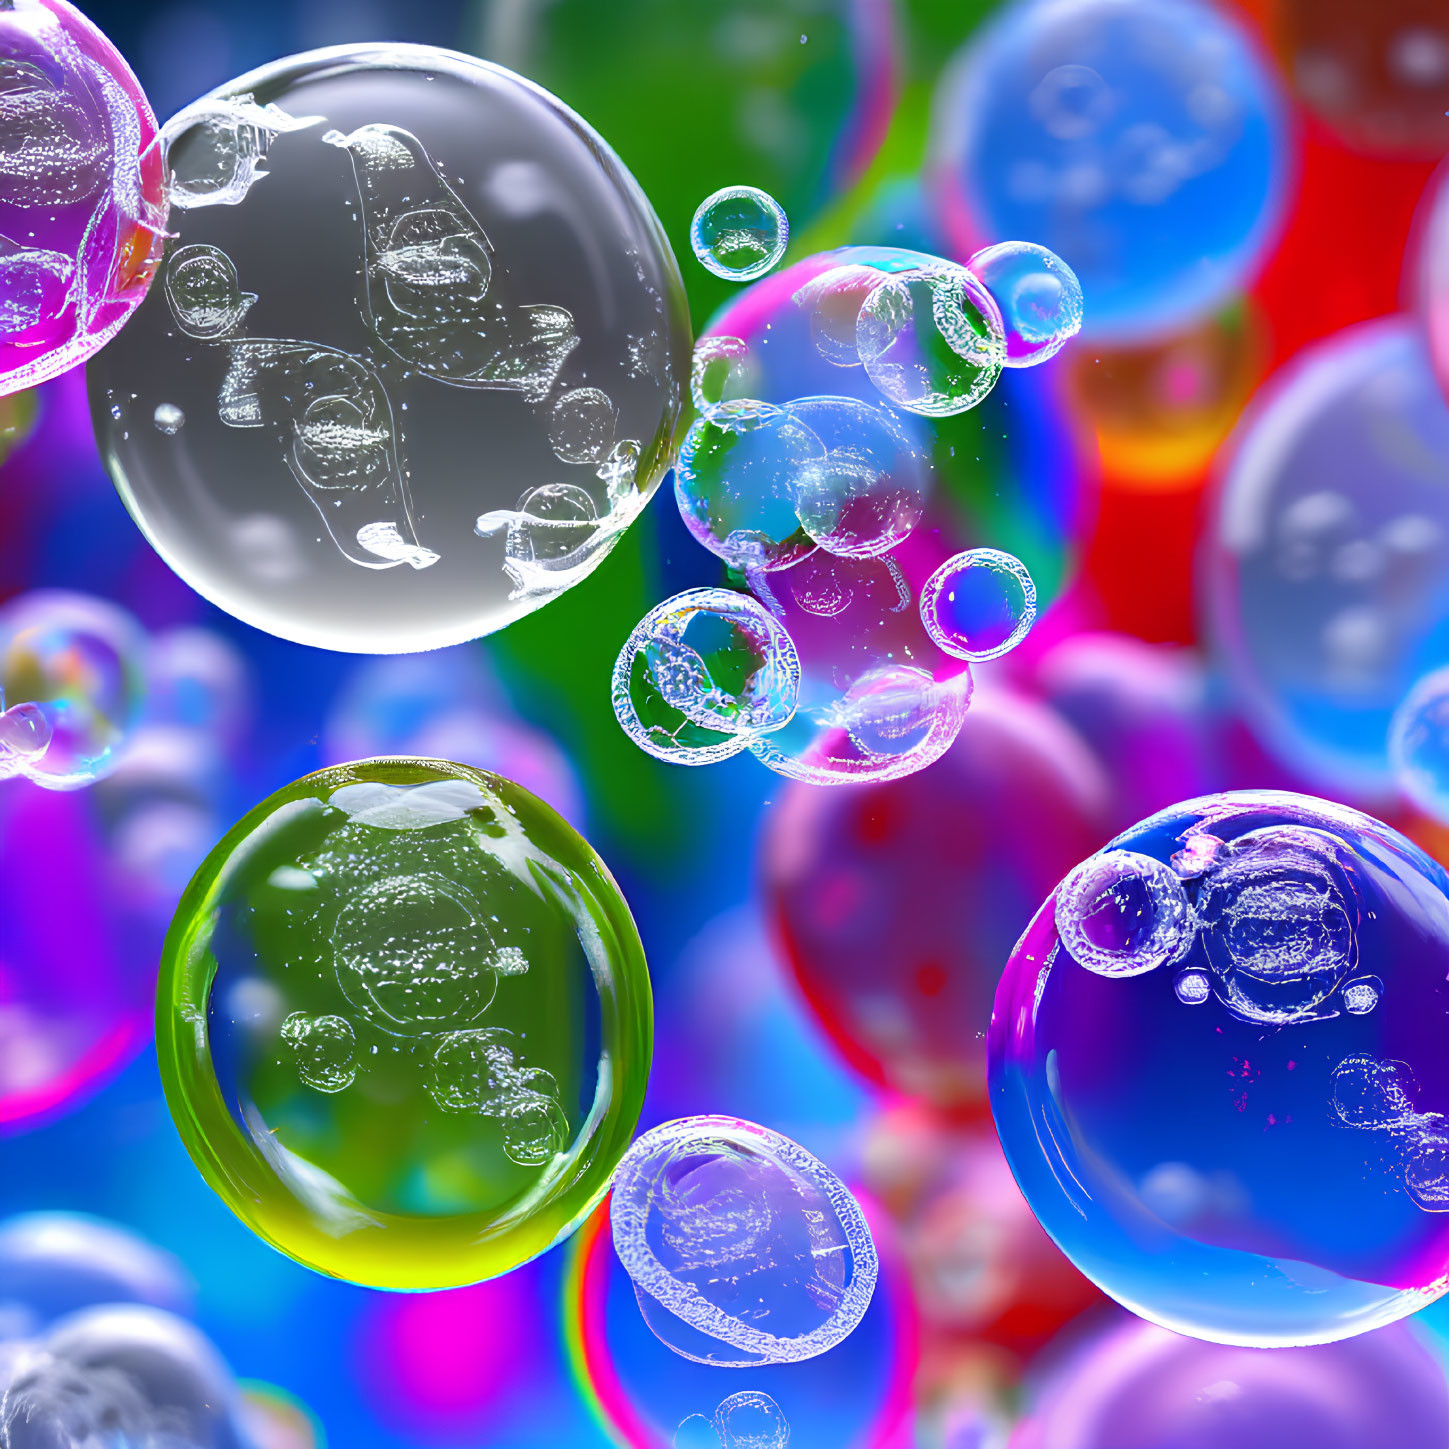 Colorful soap bubbles on reflective surface against bokeh background